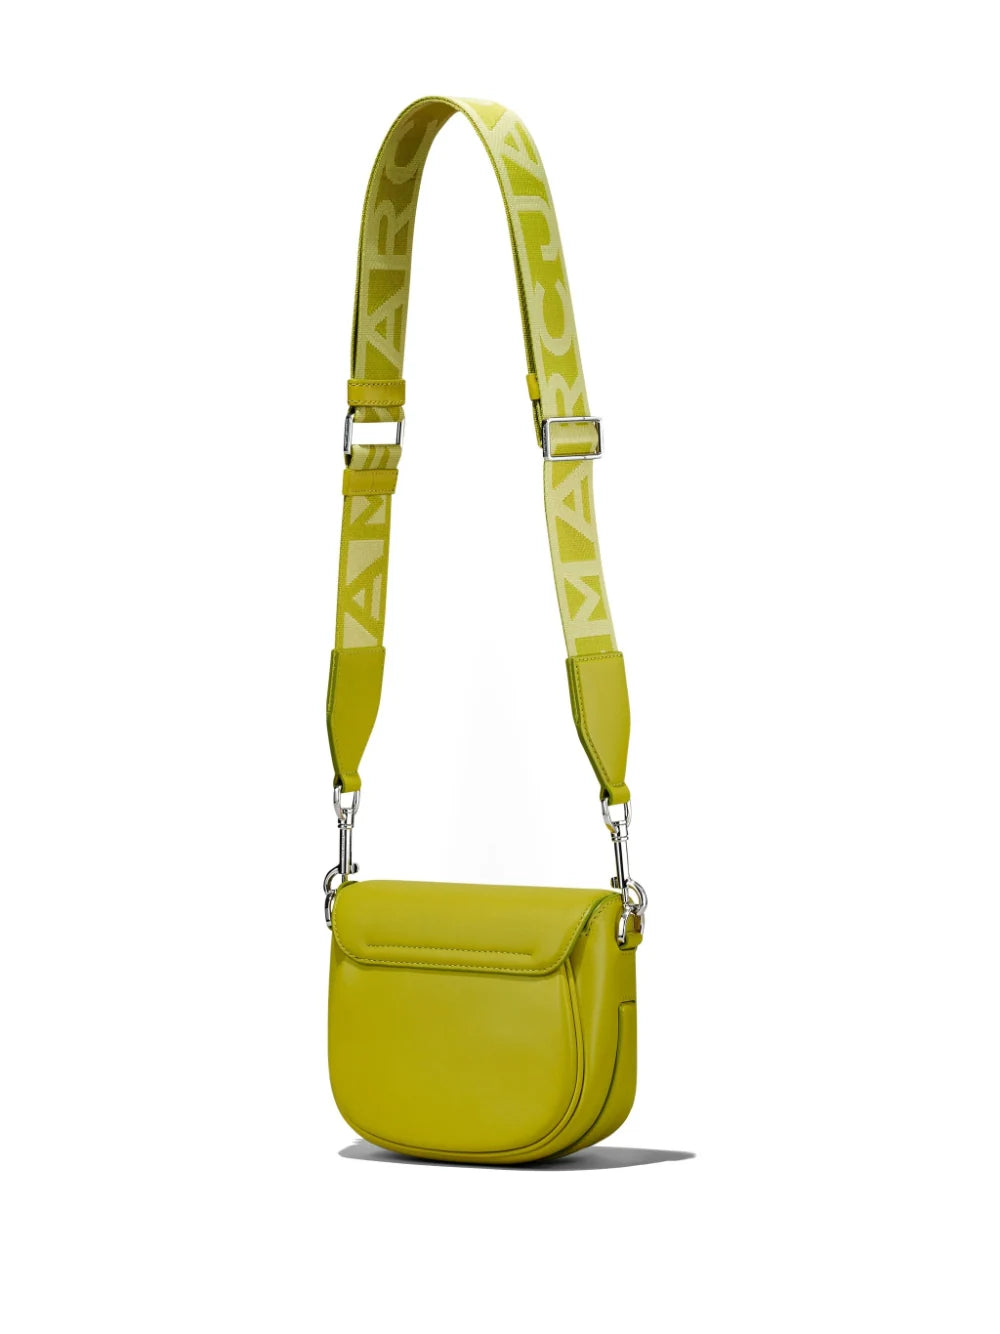 Marc Jacobs The J Marc Small Saddle Bag in Yellow